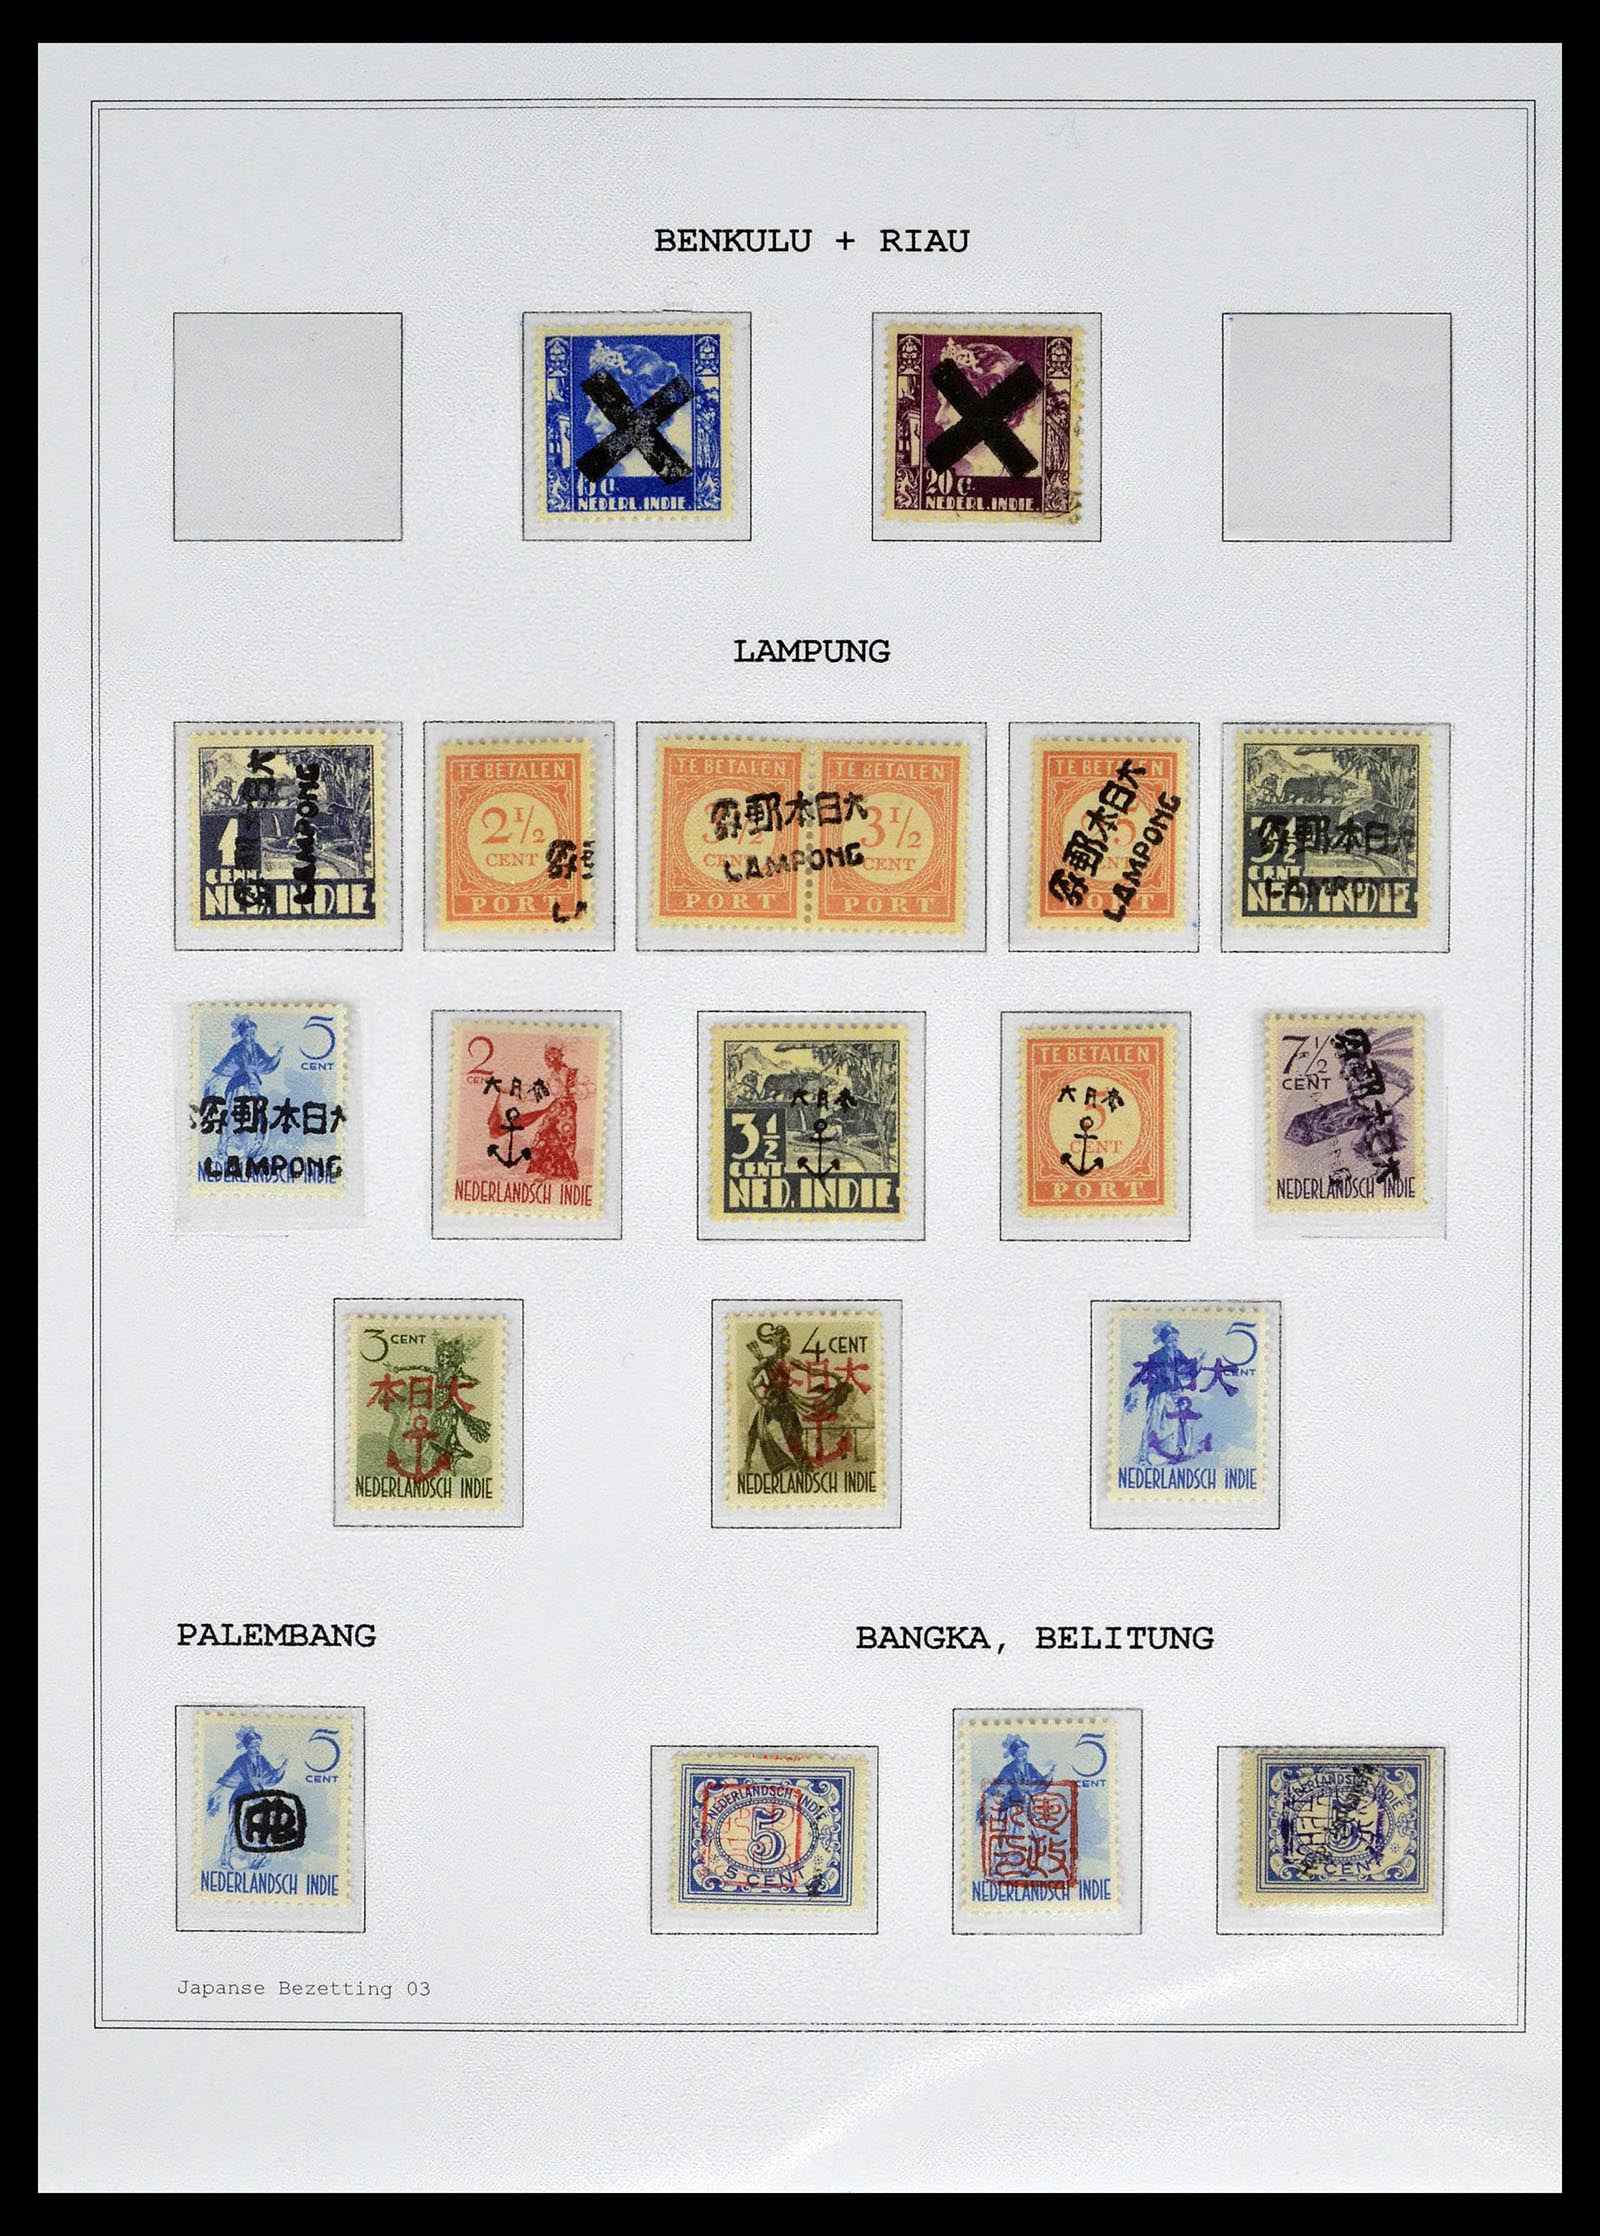 39026 0072 - Stamp collection 39026 Dutch east Indies and Suriname 1864-1975.